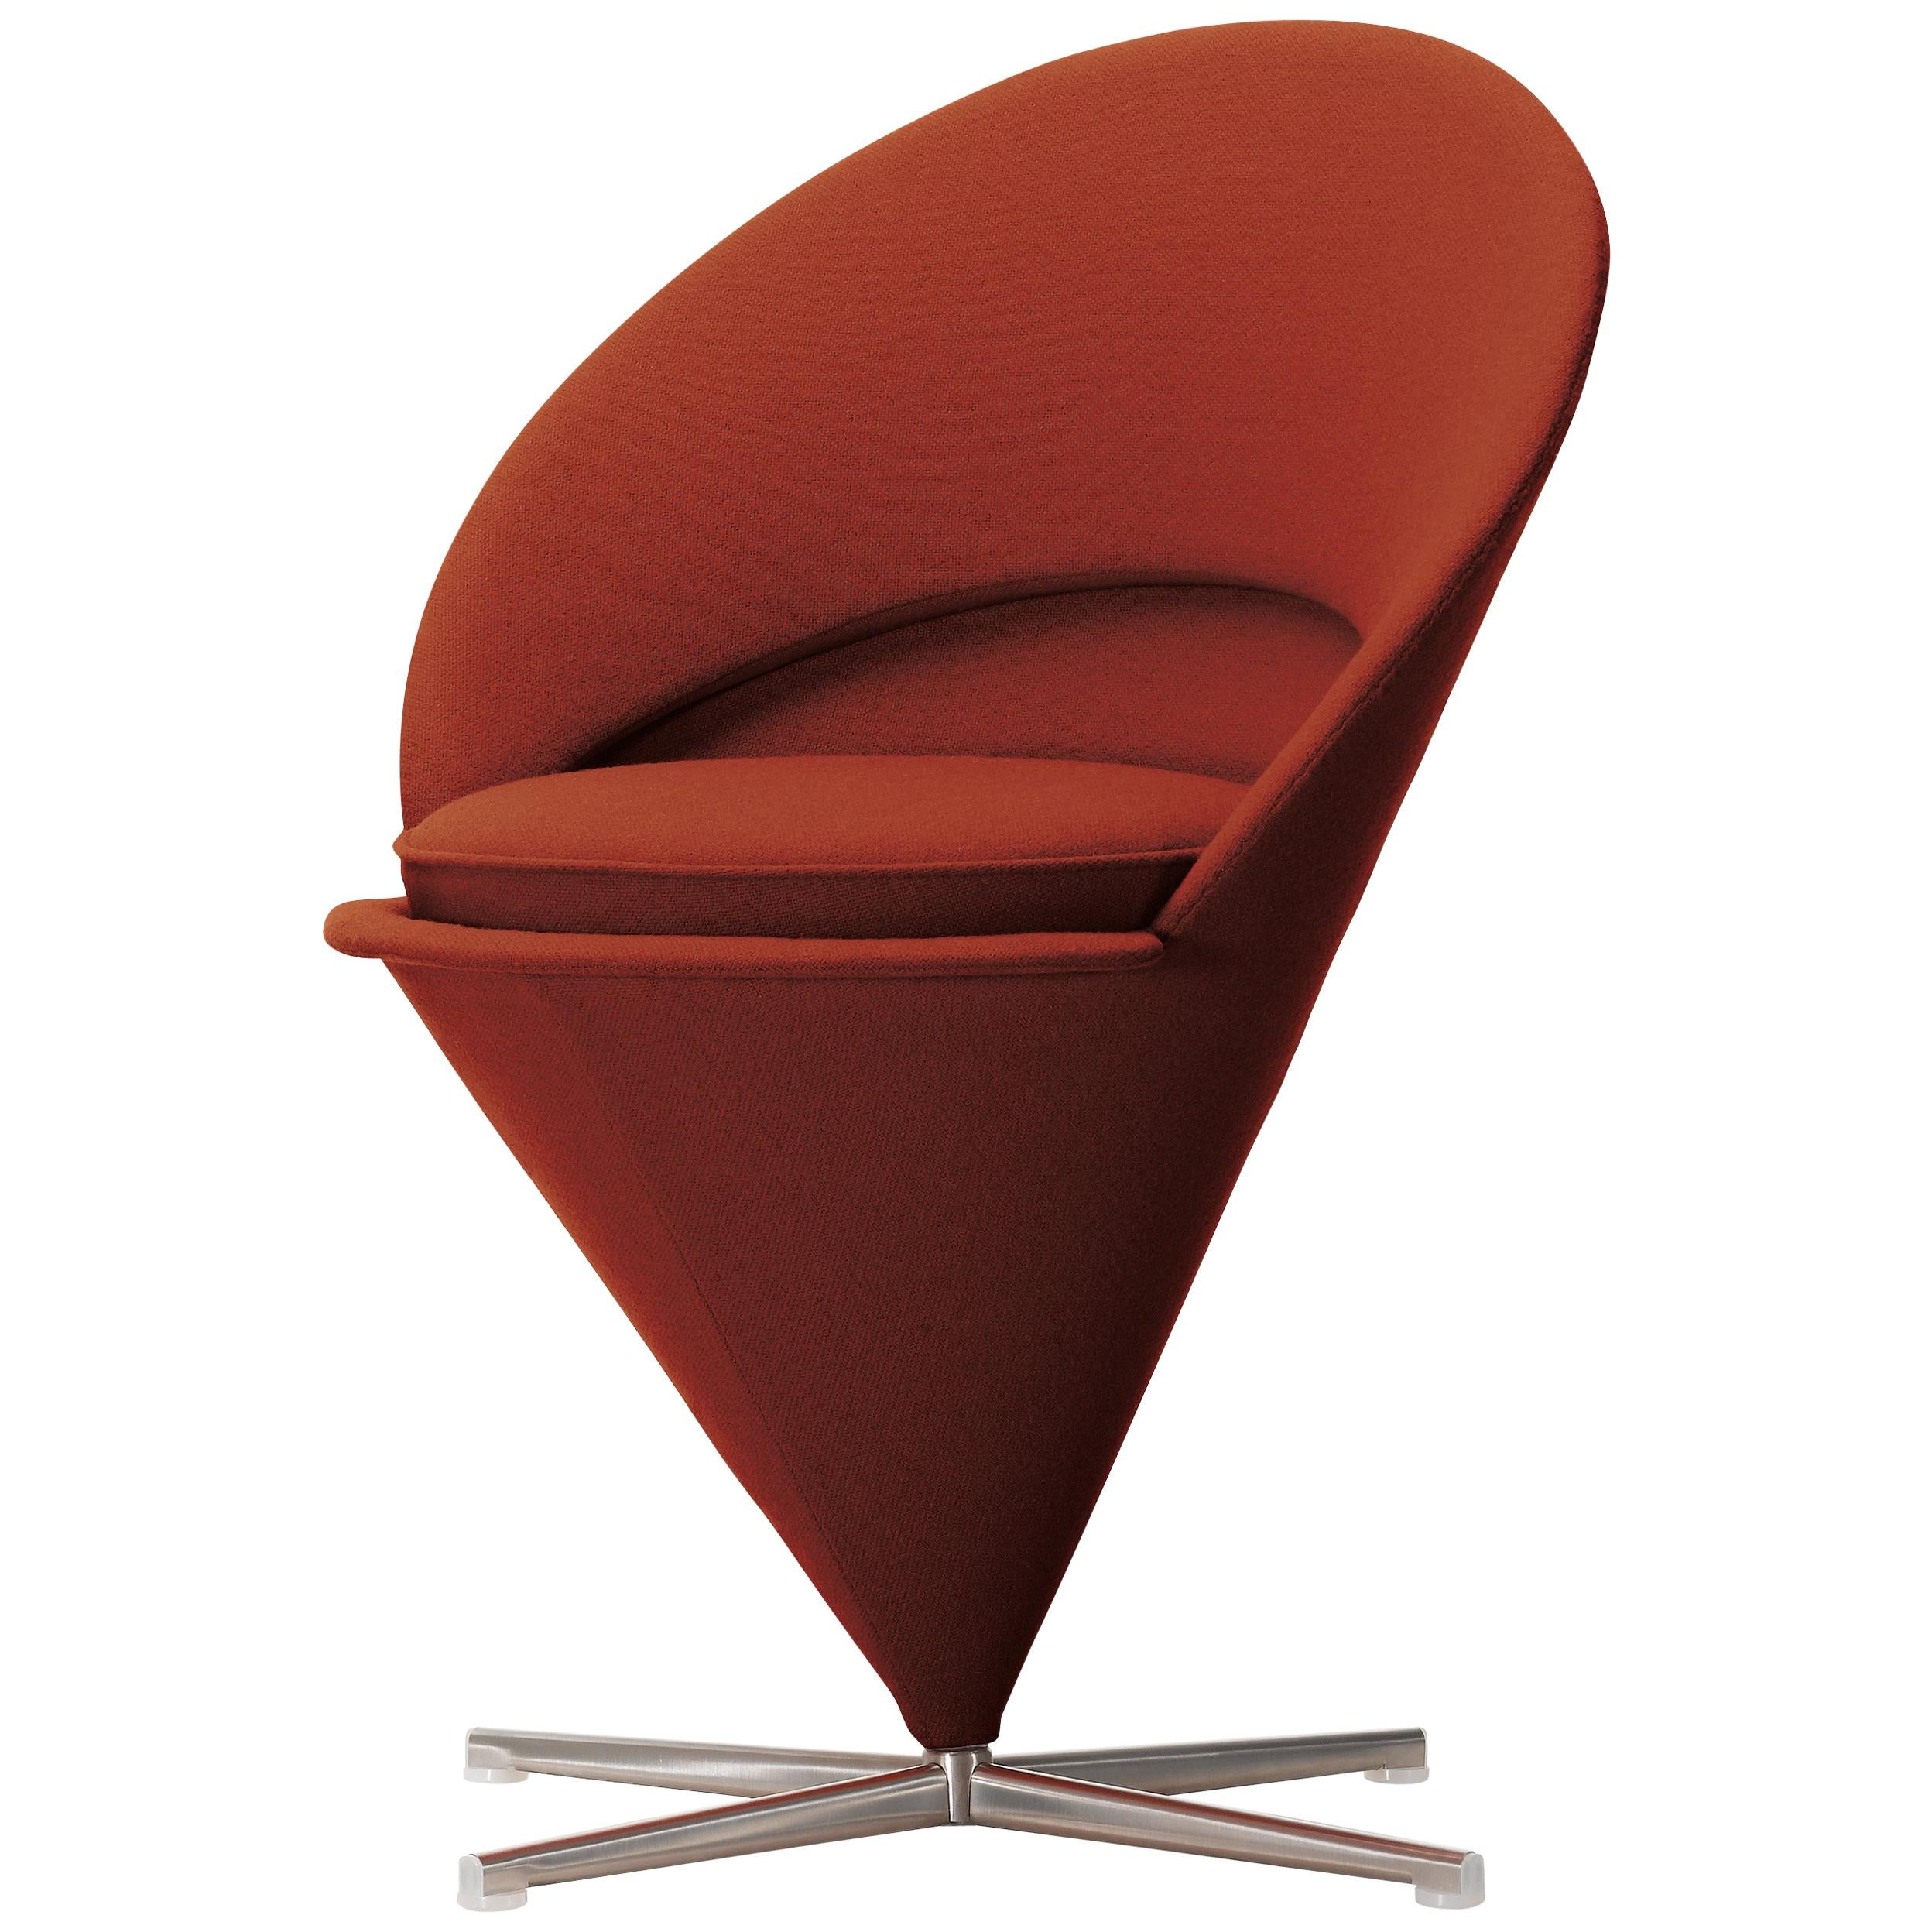 Vitra Cone Chair in Rust Orange by Verner Panton For Sale